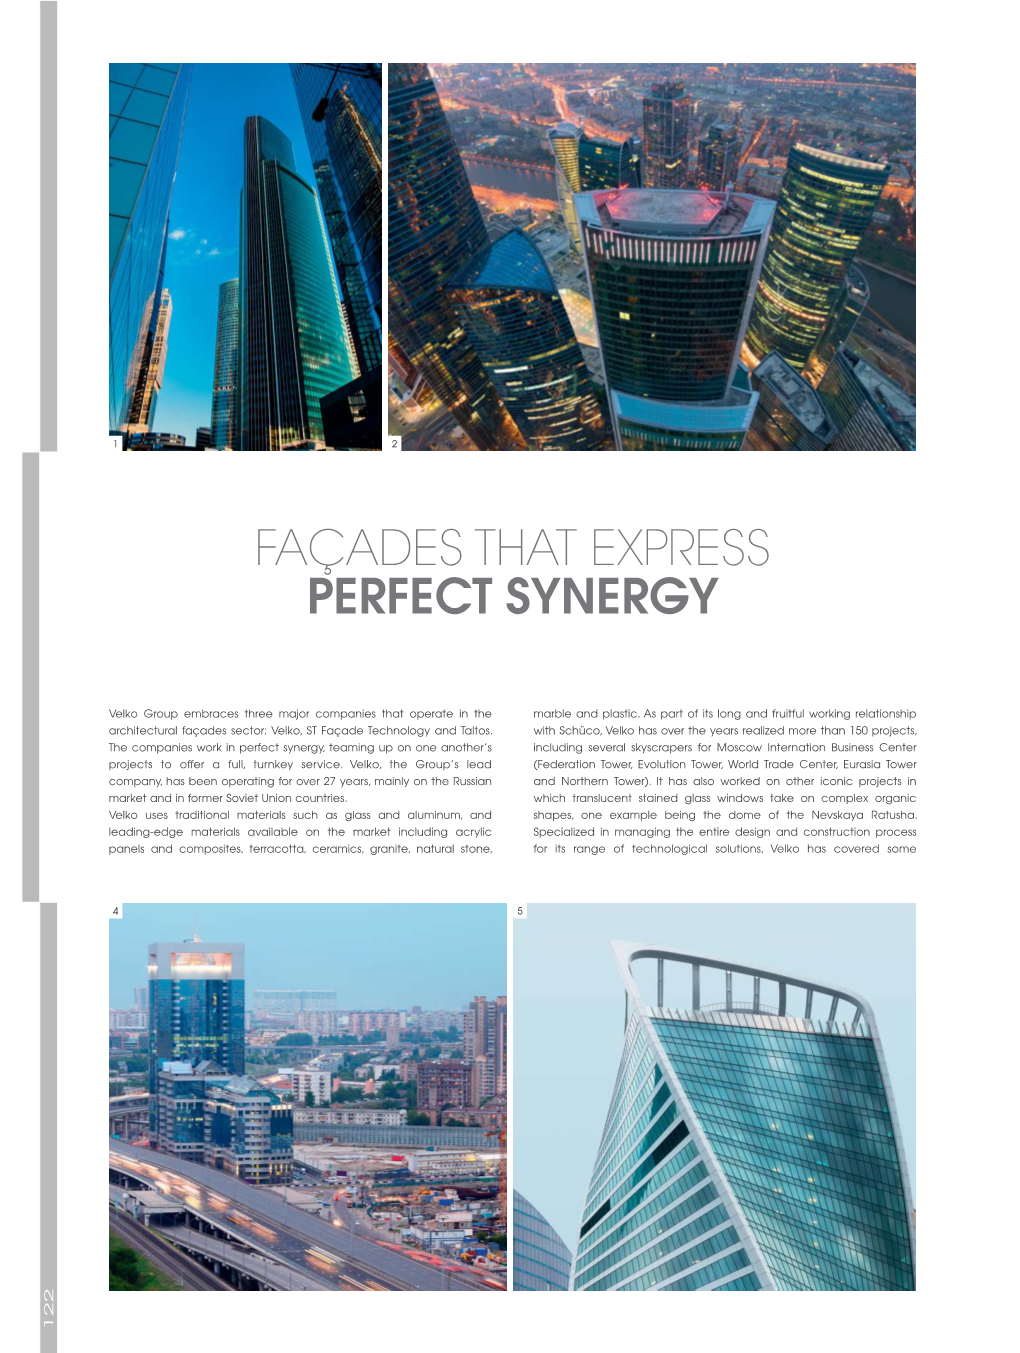 Façades That Express Perfect Synergy